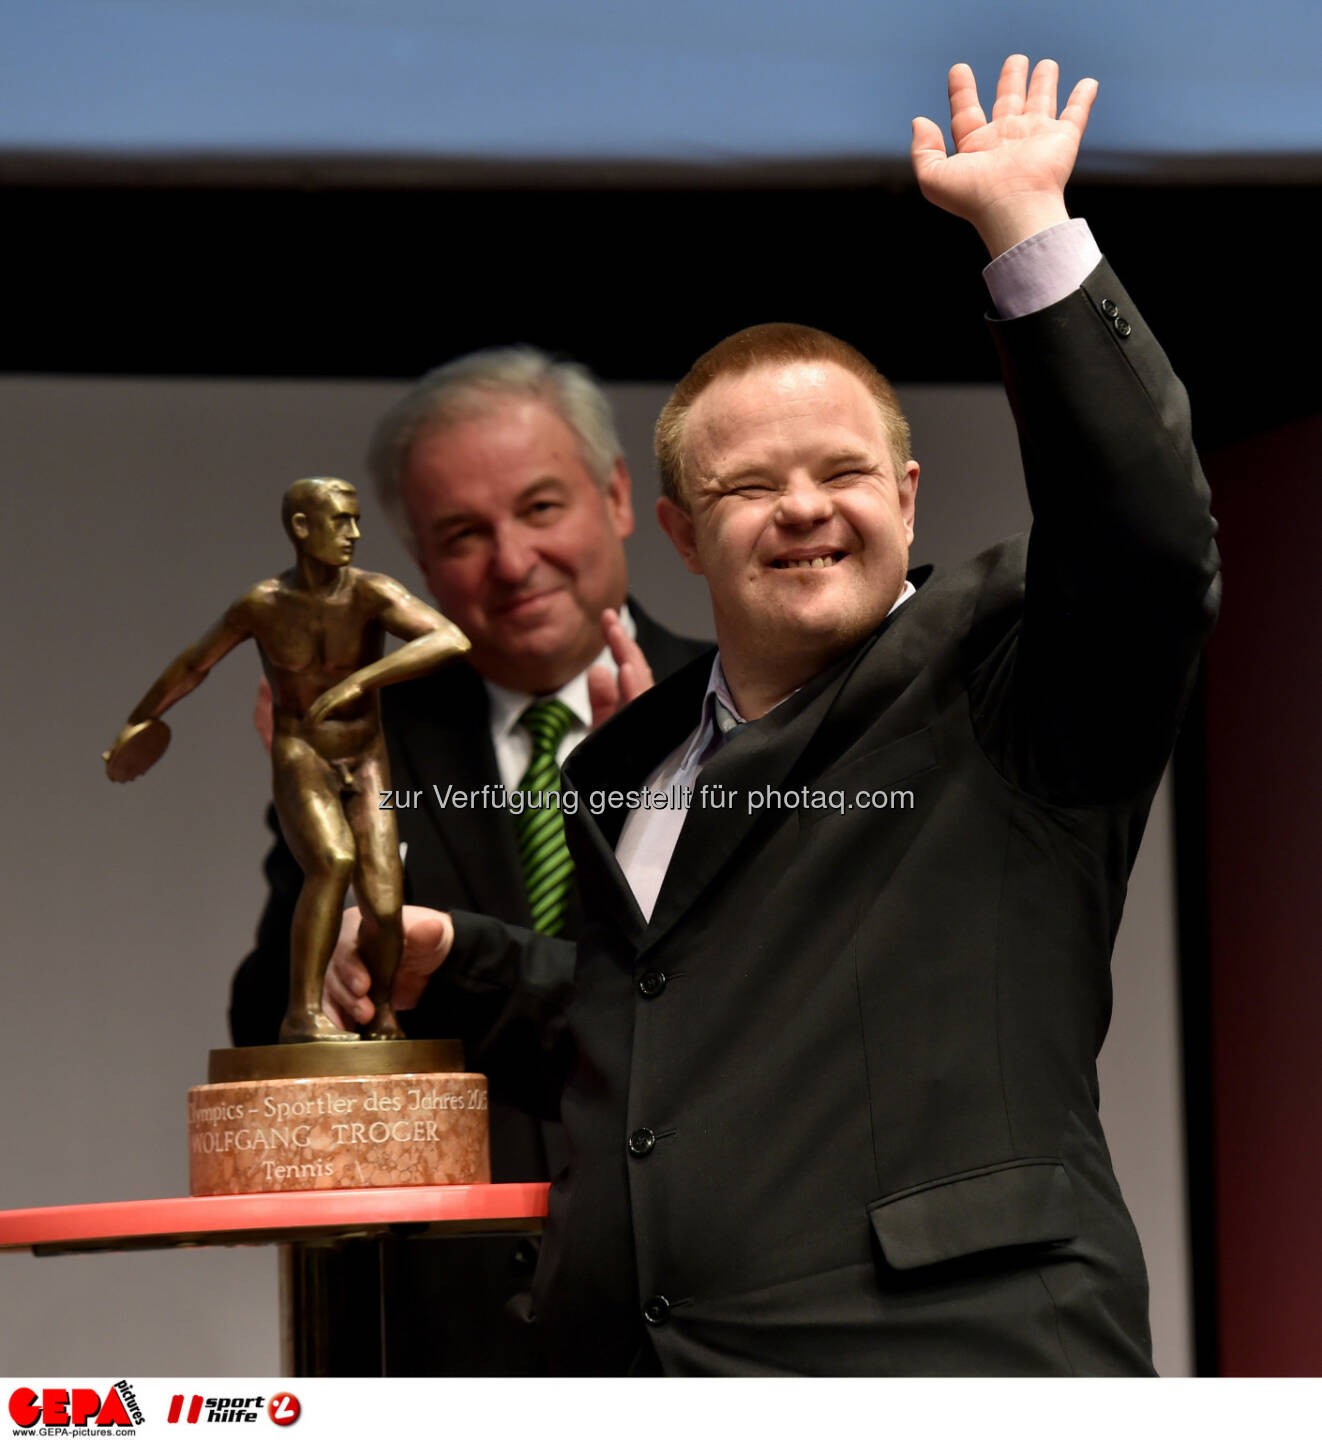 Special Olympics Sportsman of the year Wolfgang Troger (Tennis)
Photo: Gepa pictures/ Michael Riedler